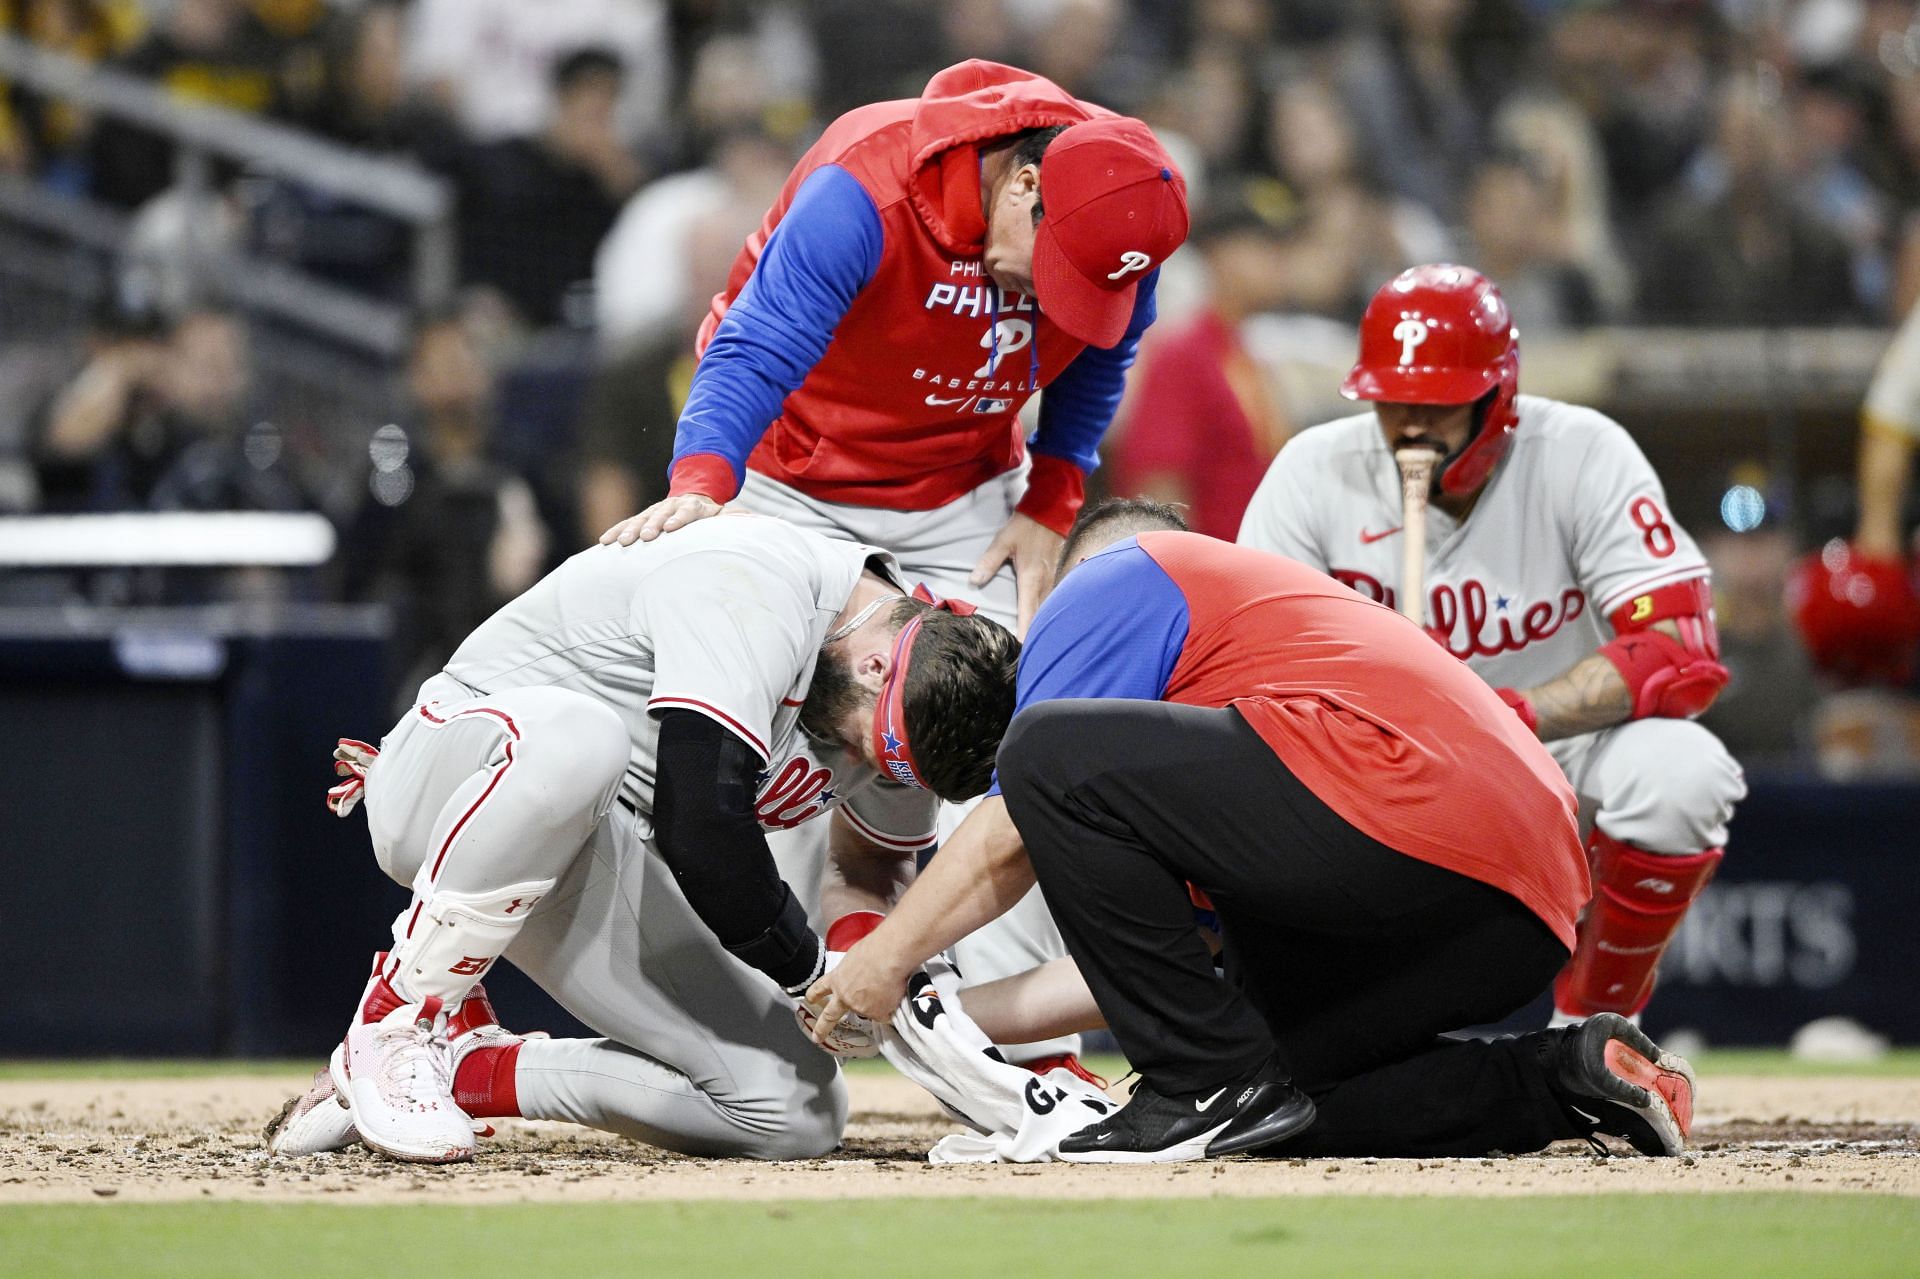 Bryce Harper fractured his left thumb after being hit with a pitch during the fourth inning against the San Diego Padres.